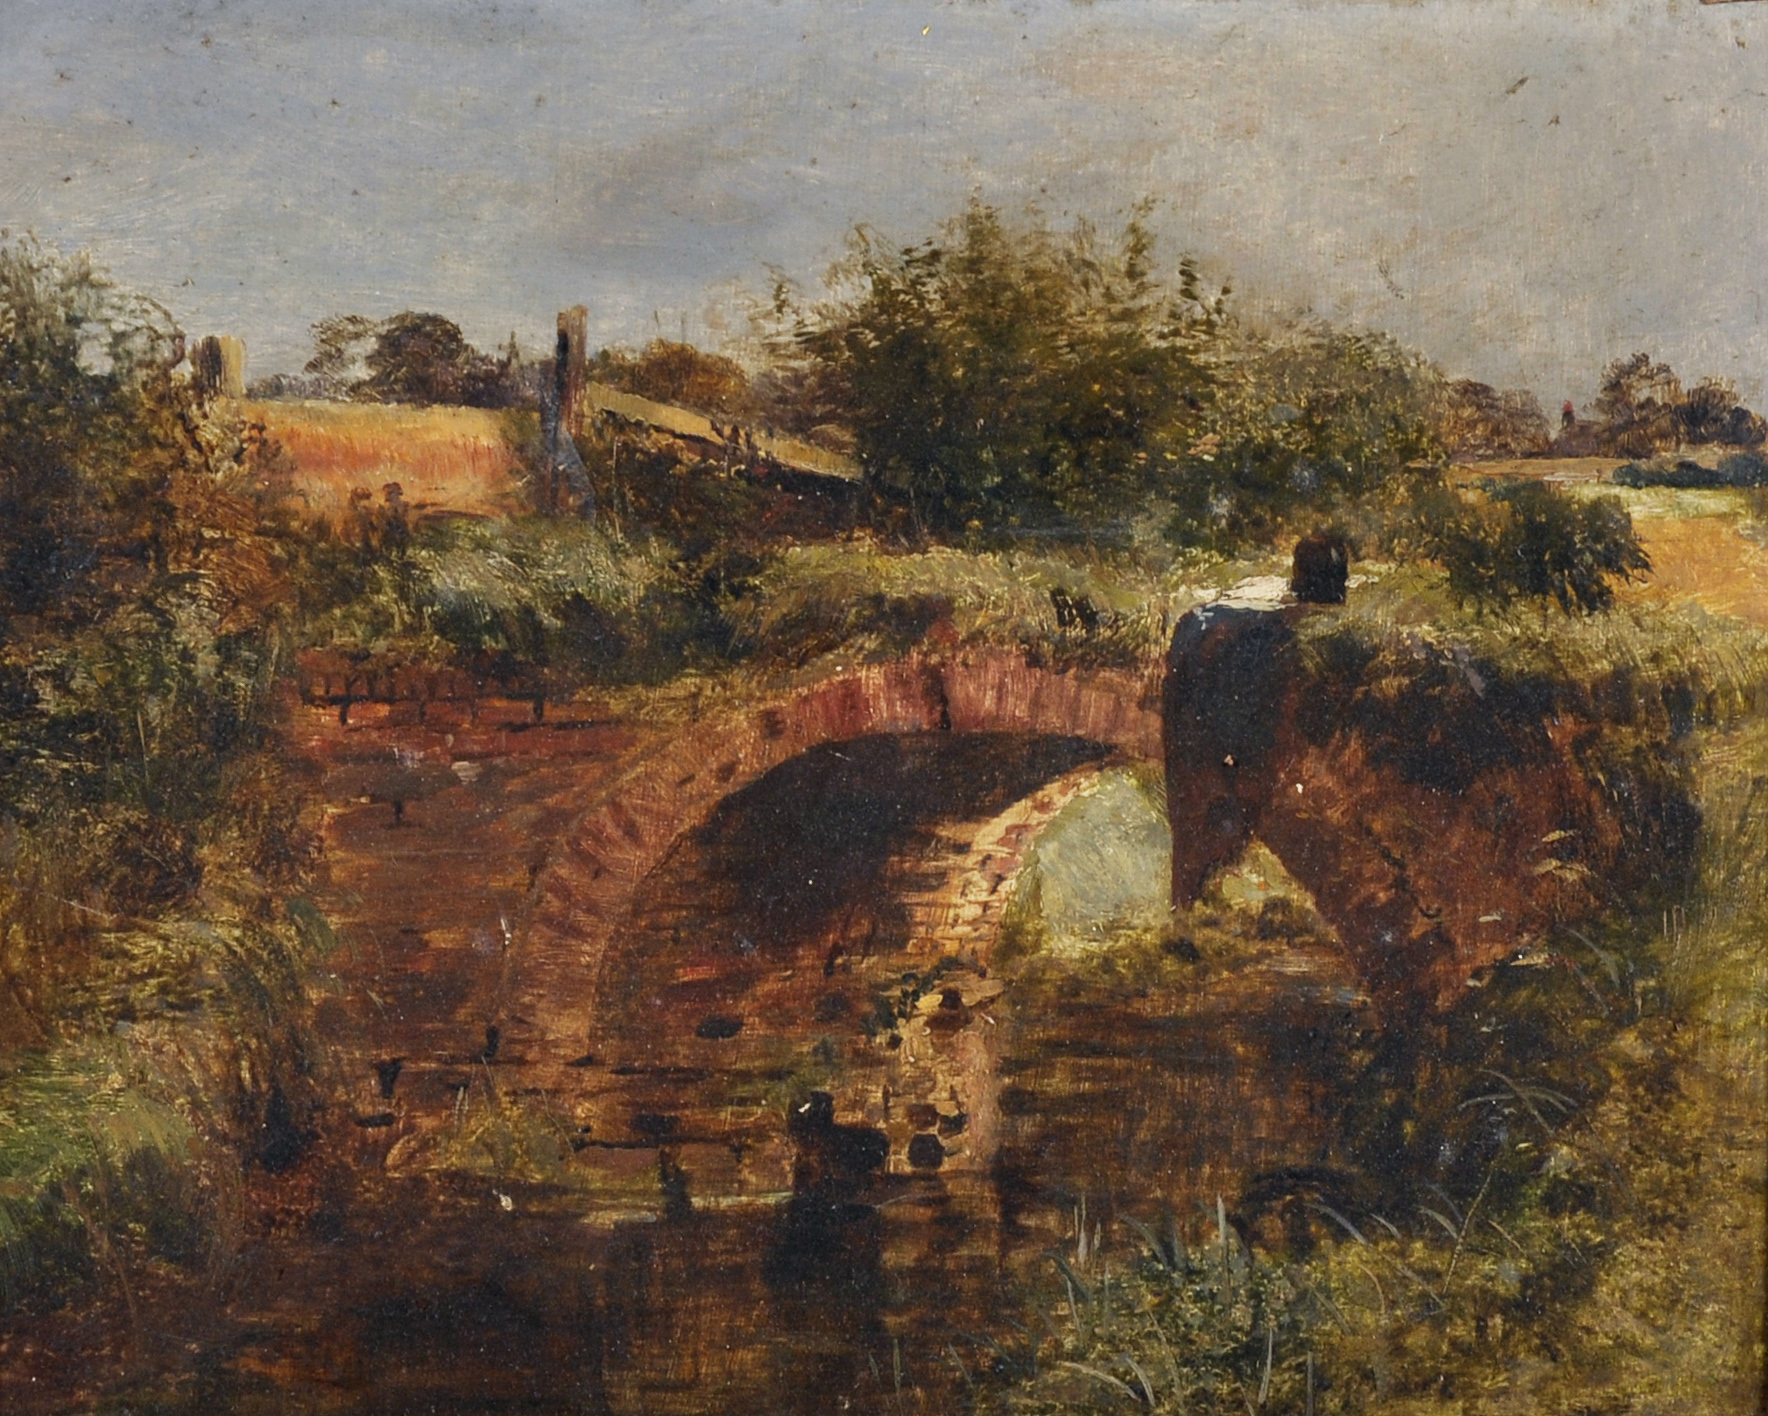 Robert Tonge (1823-1856) British. Study of a Bridge, Possibly on the Wirrall, Oil on Board,